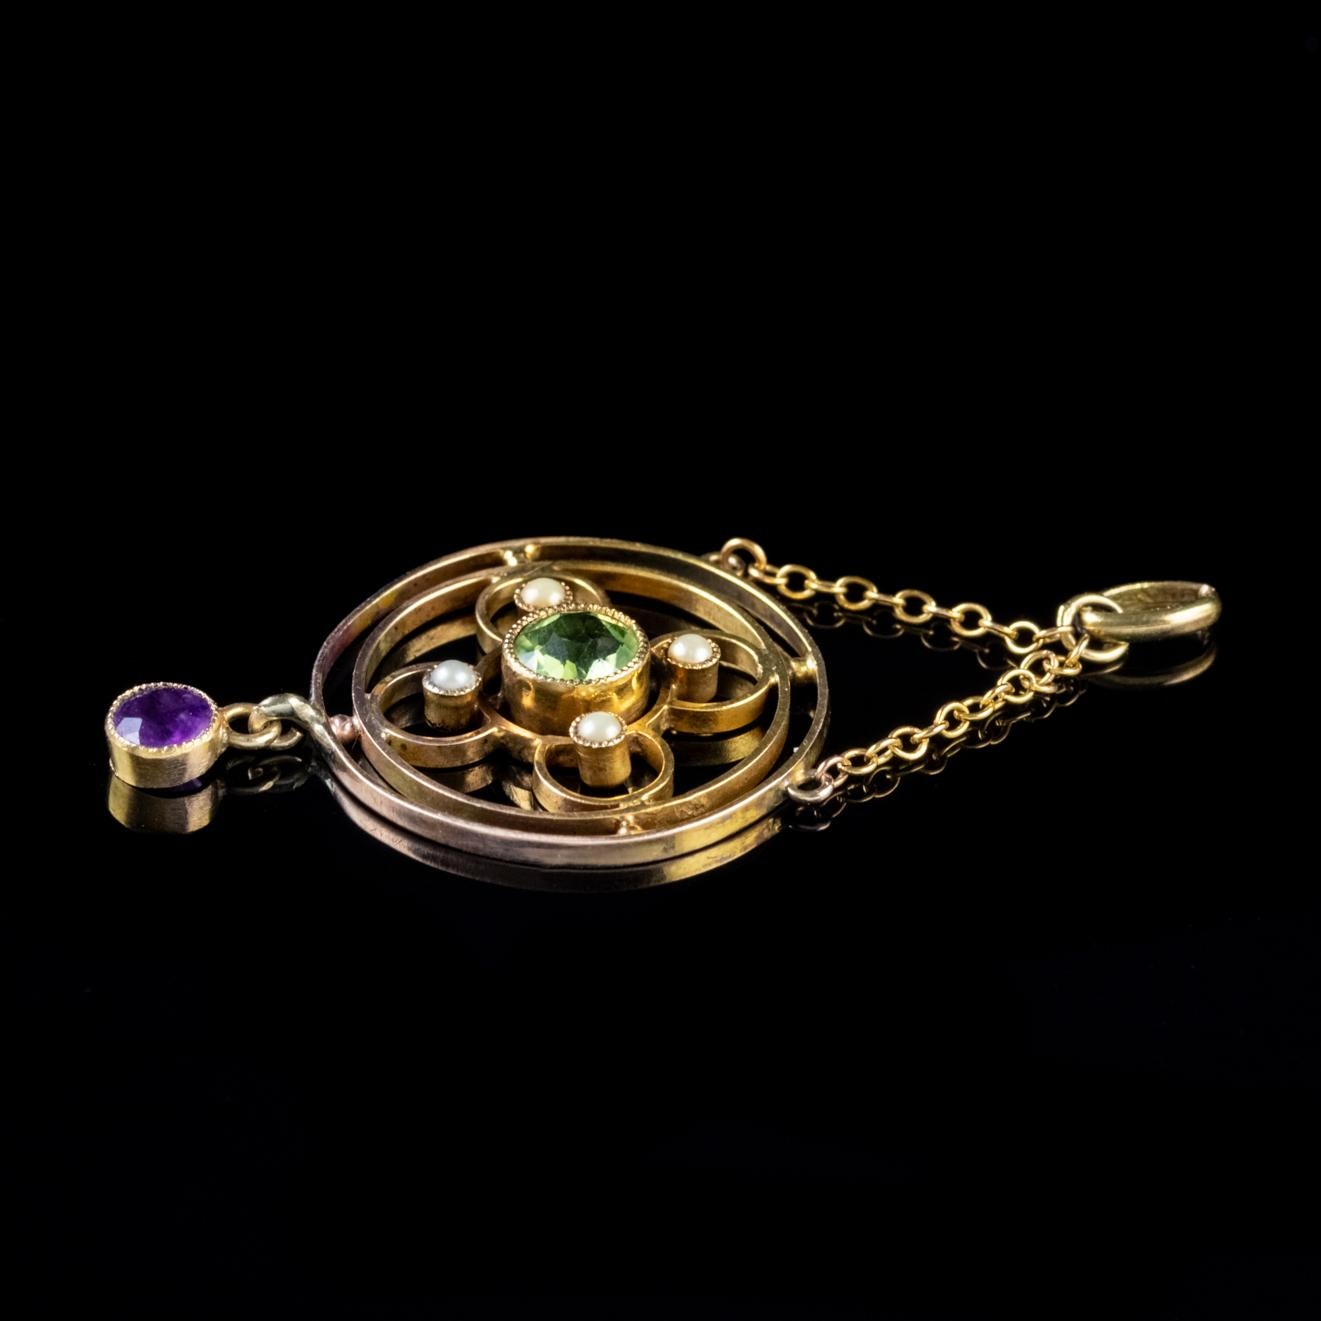 Antique Edwardian Suffragette Peridot Amethyst Pendant 9ct Gold Circa 1910 In Good Condition For Sale In Lancaster, Lancashire